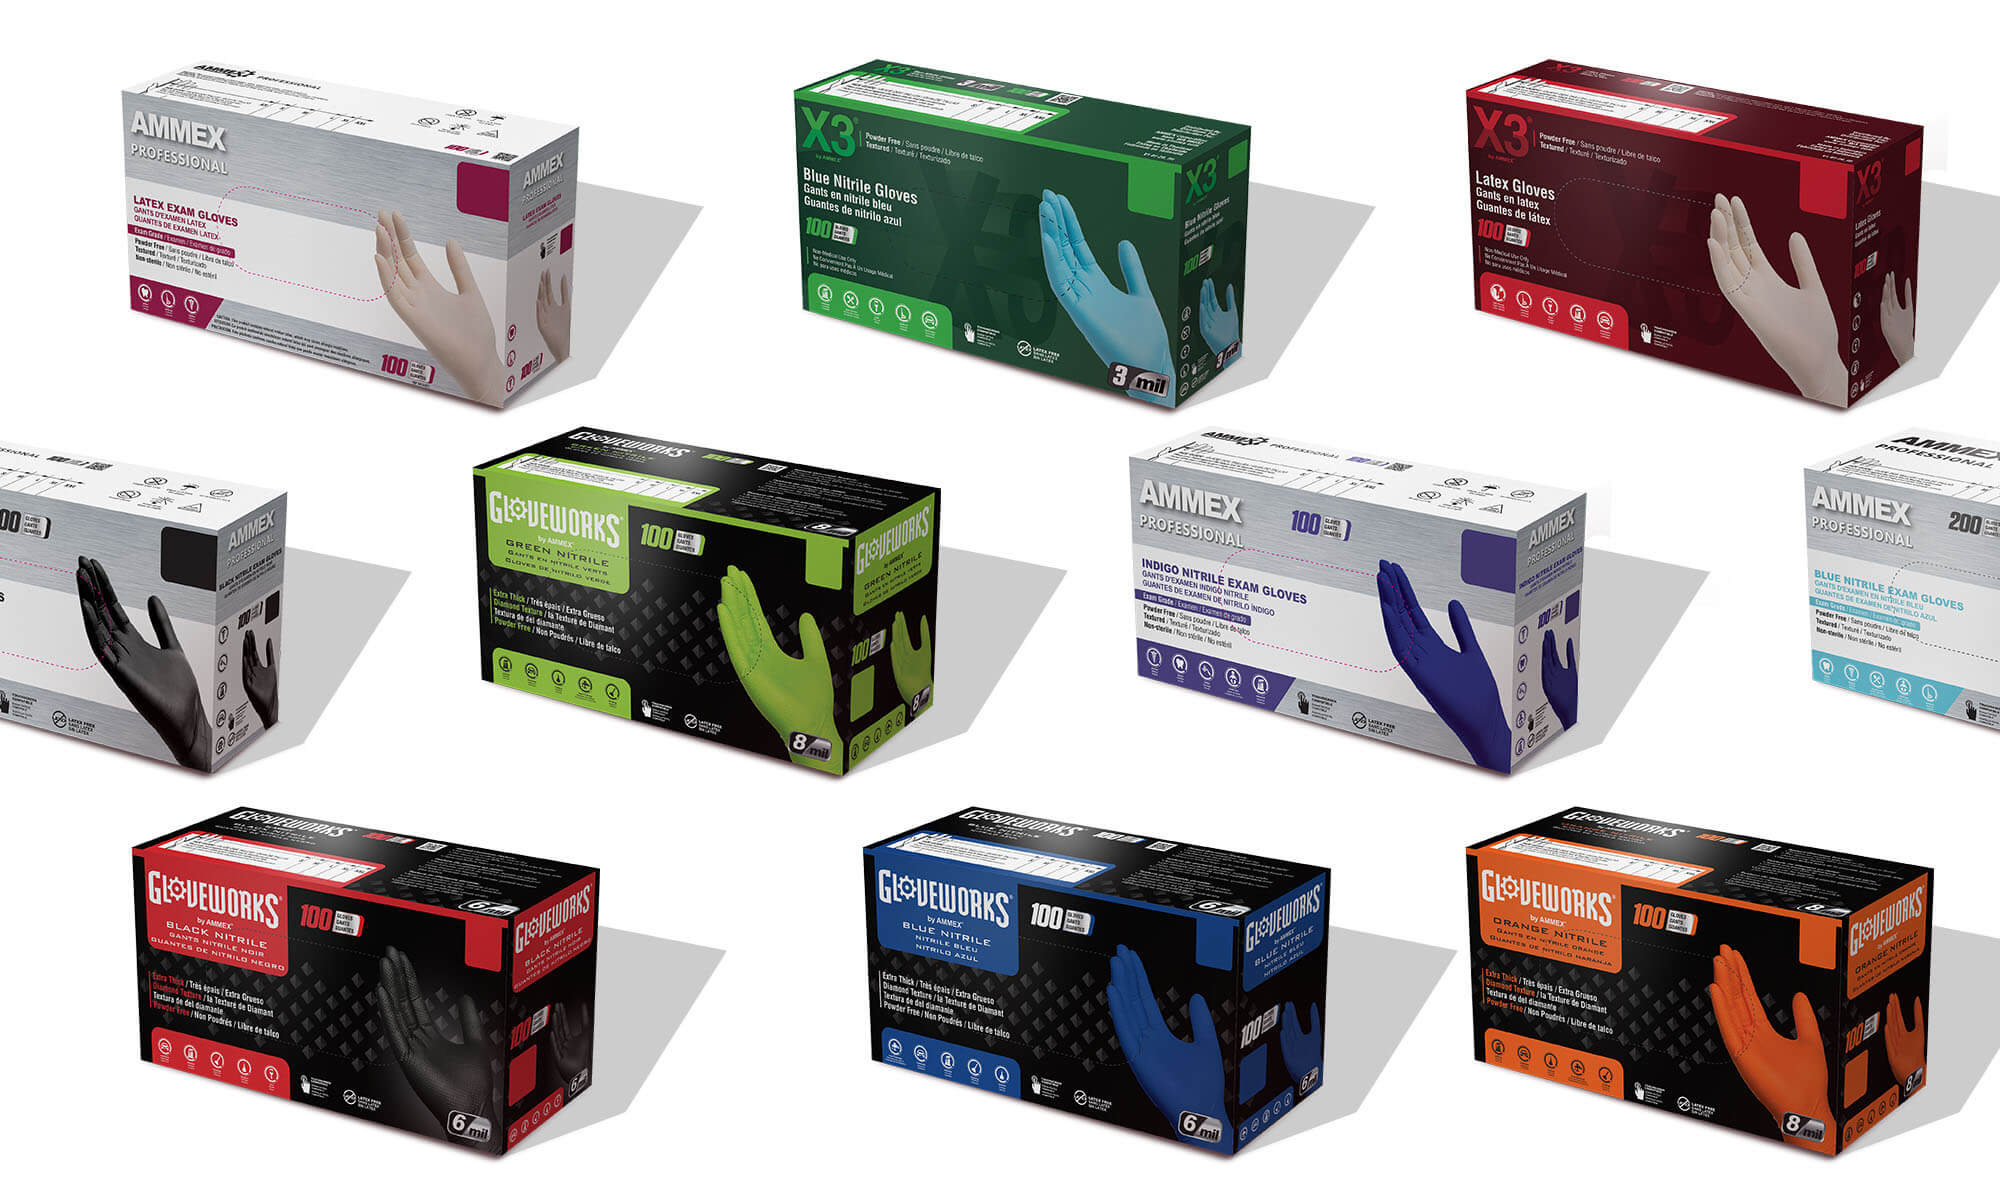 AMMEX's new packaging will begin to make its debut in February 2021.